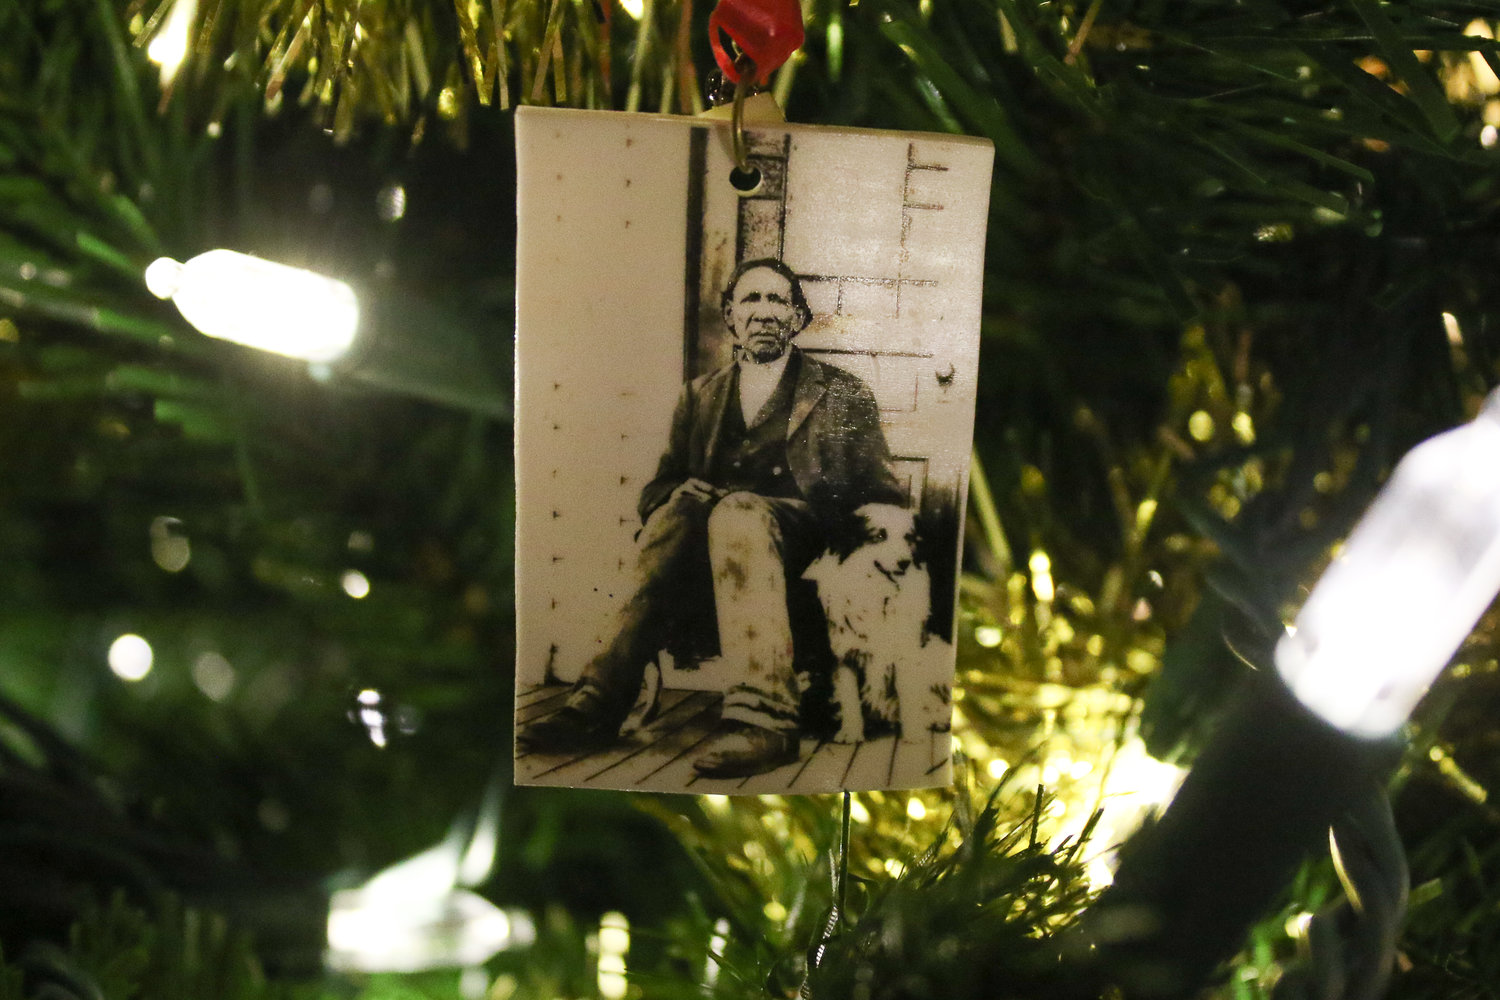 A homemade Christmas tree ornament featuring a photograph of George Washington sits in Kerry Serl's tree. Serl, along with Brian Mittge, authored Washington's biography and just released the book's second edition.